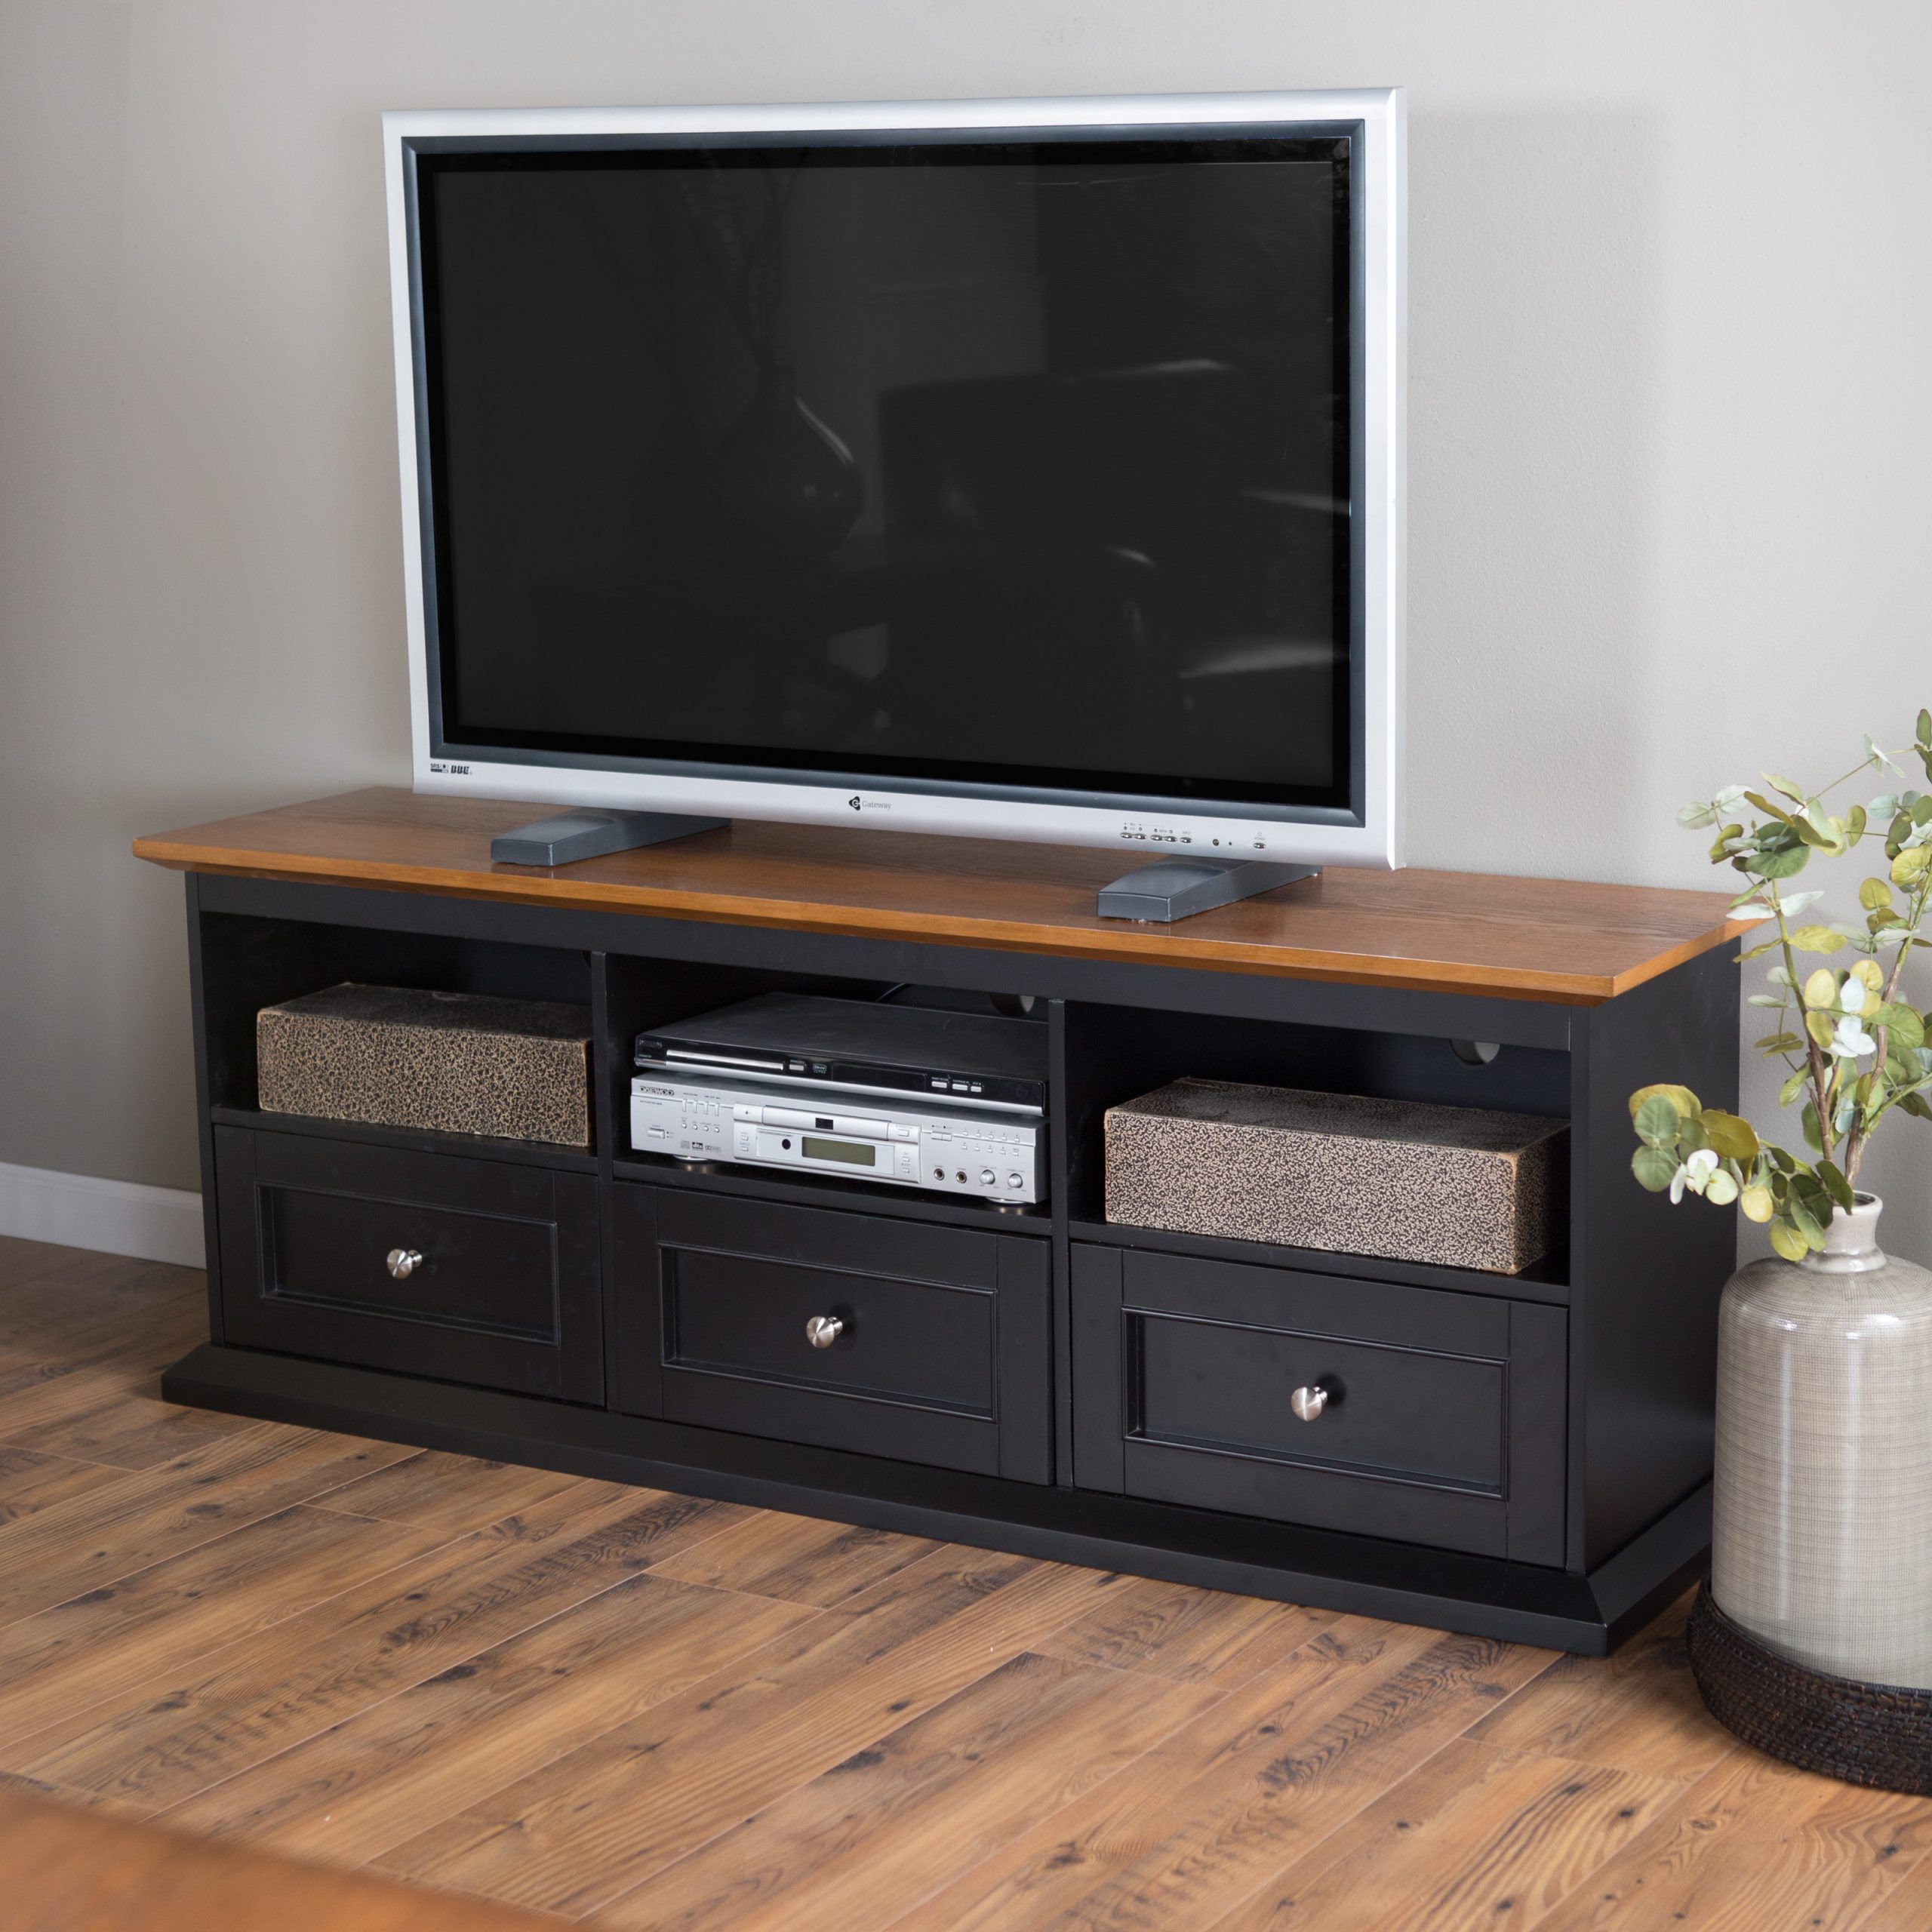 Belham Living Hampton Tv Stand With Drawers – Black/oak At Intended For Oak Tv Stands (View 5 of 15)